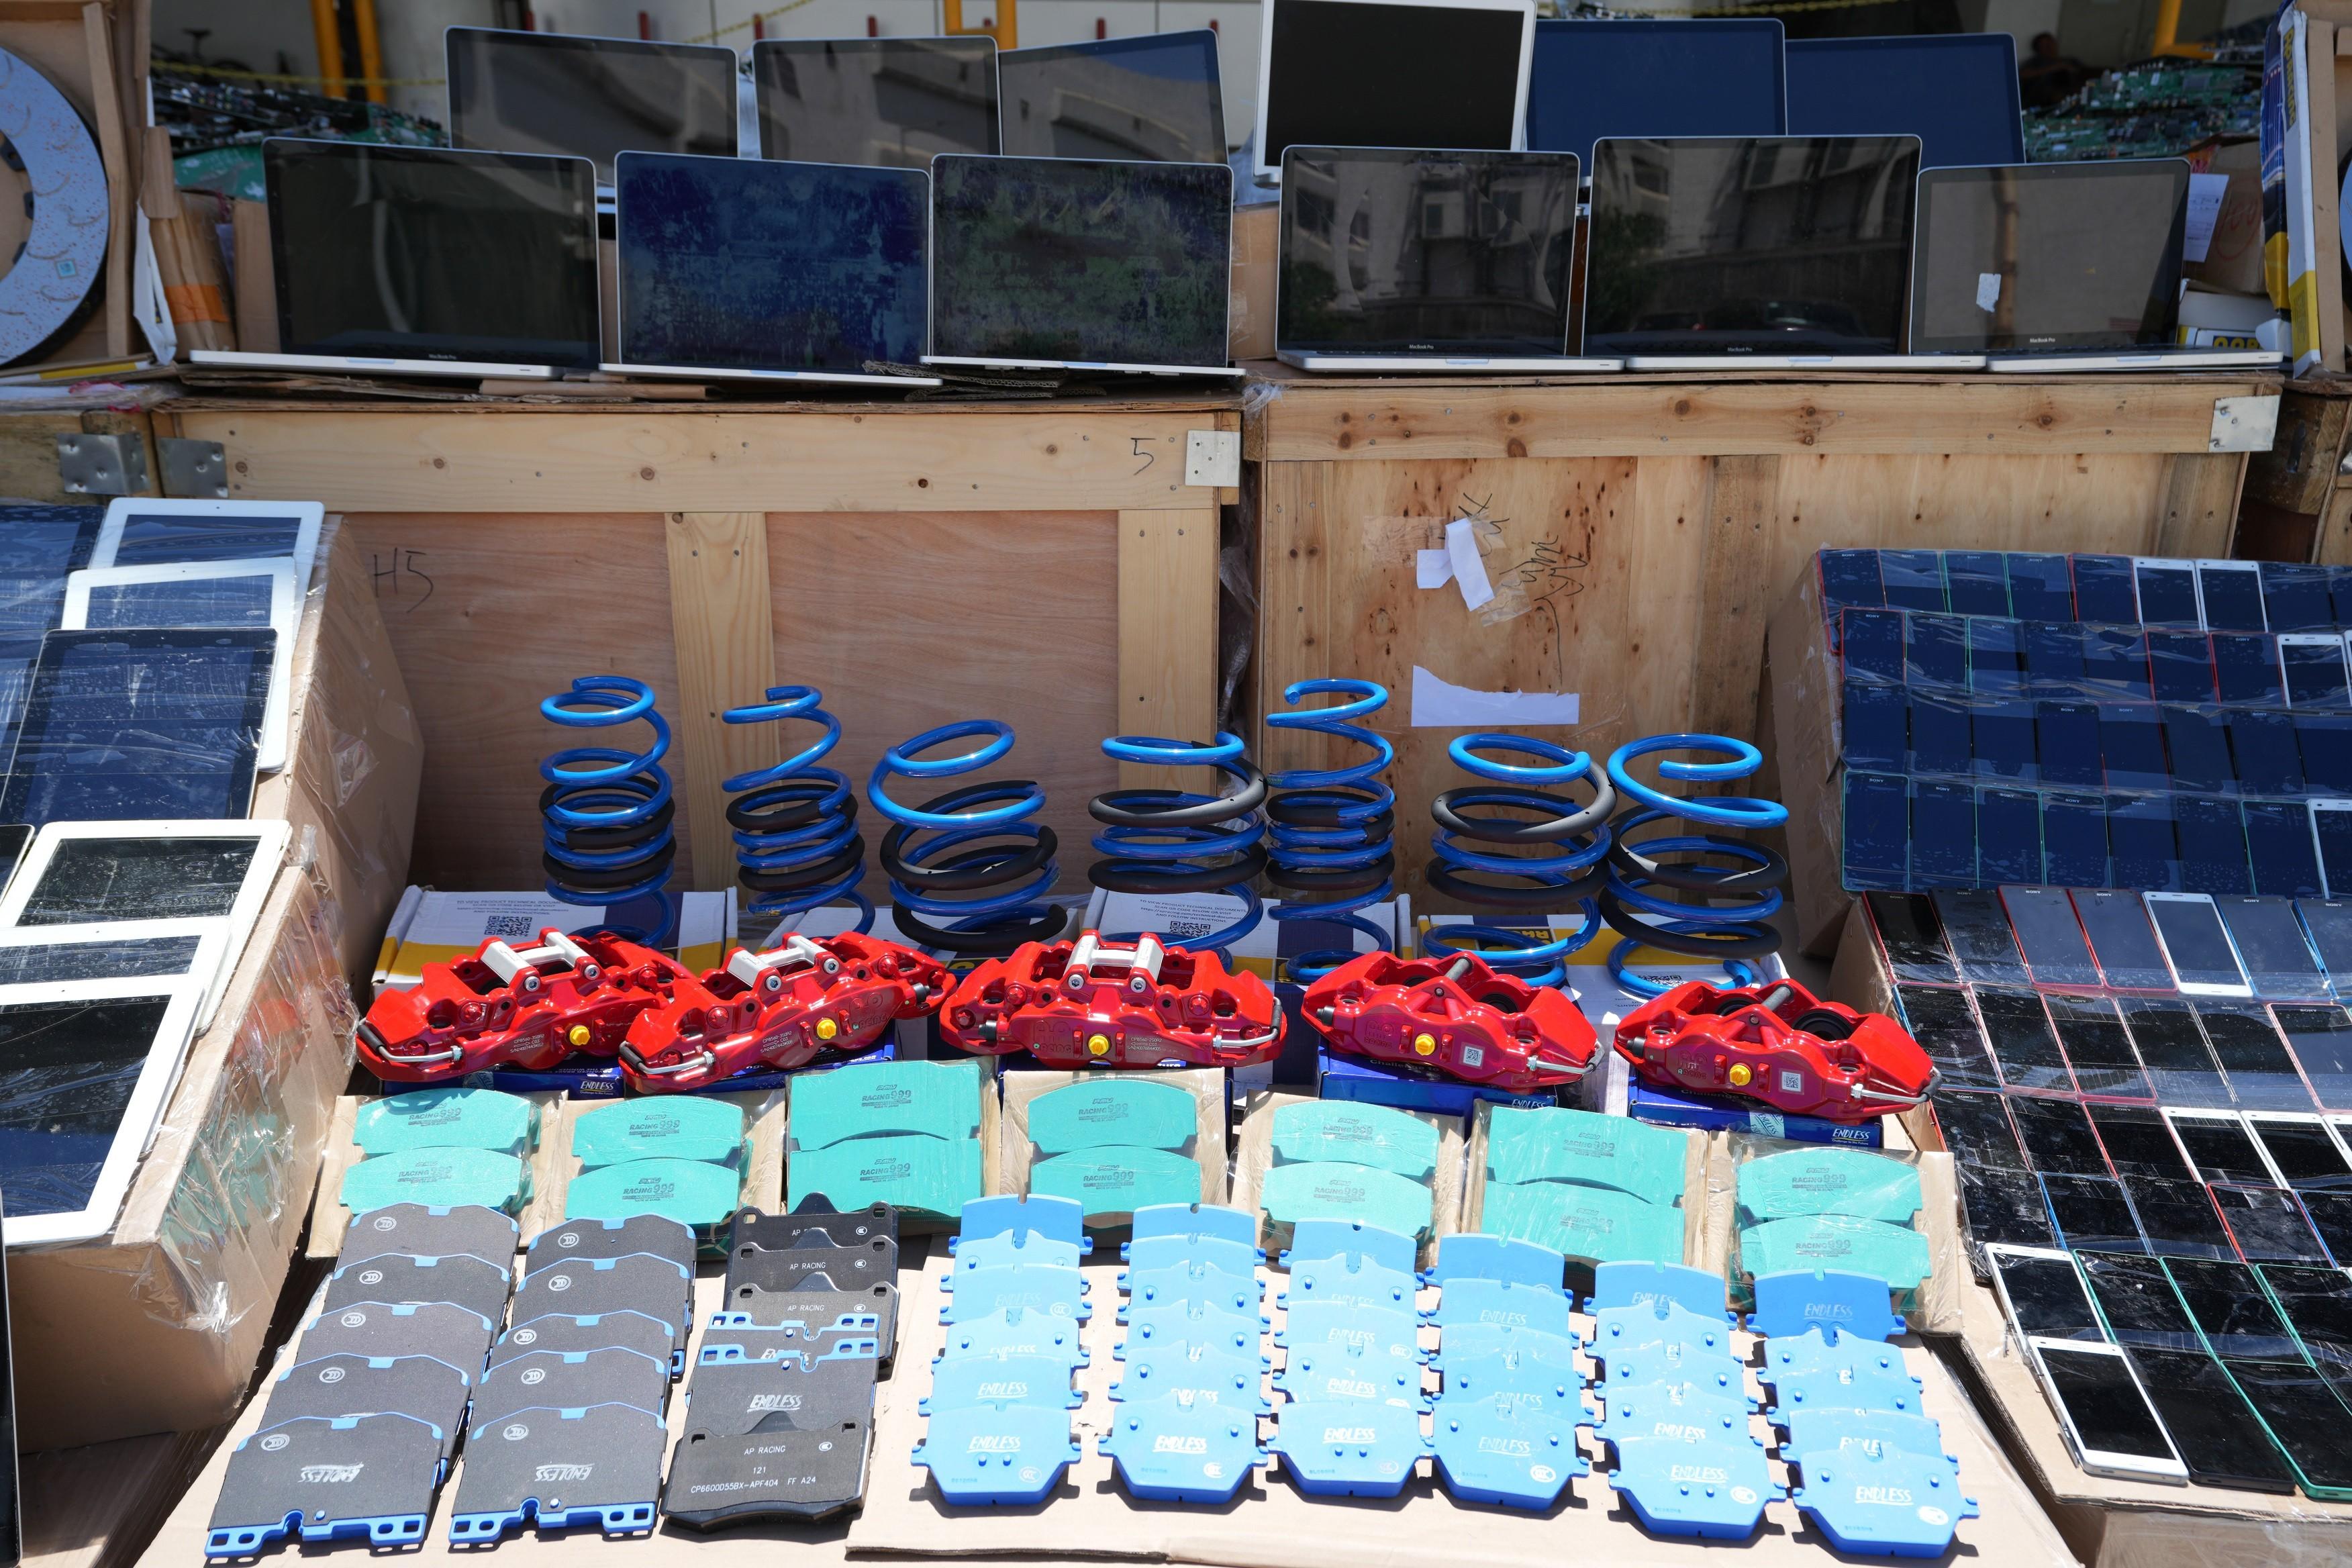 Hong Kong Customs mounted a special operation codenamed "Big Wave" in June and detected three suspected smuggling cases involving ocean-going vessels. A large batch of suspected smuggled goods with a total estimated market value of about $100 million was seized. Photo shows some of the suspected smuggled car parts seized.